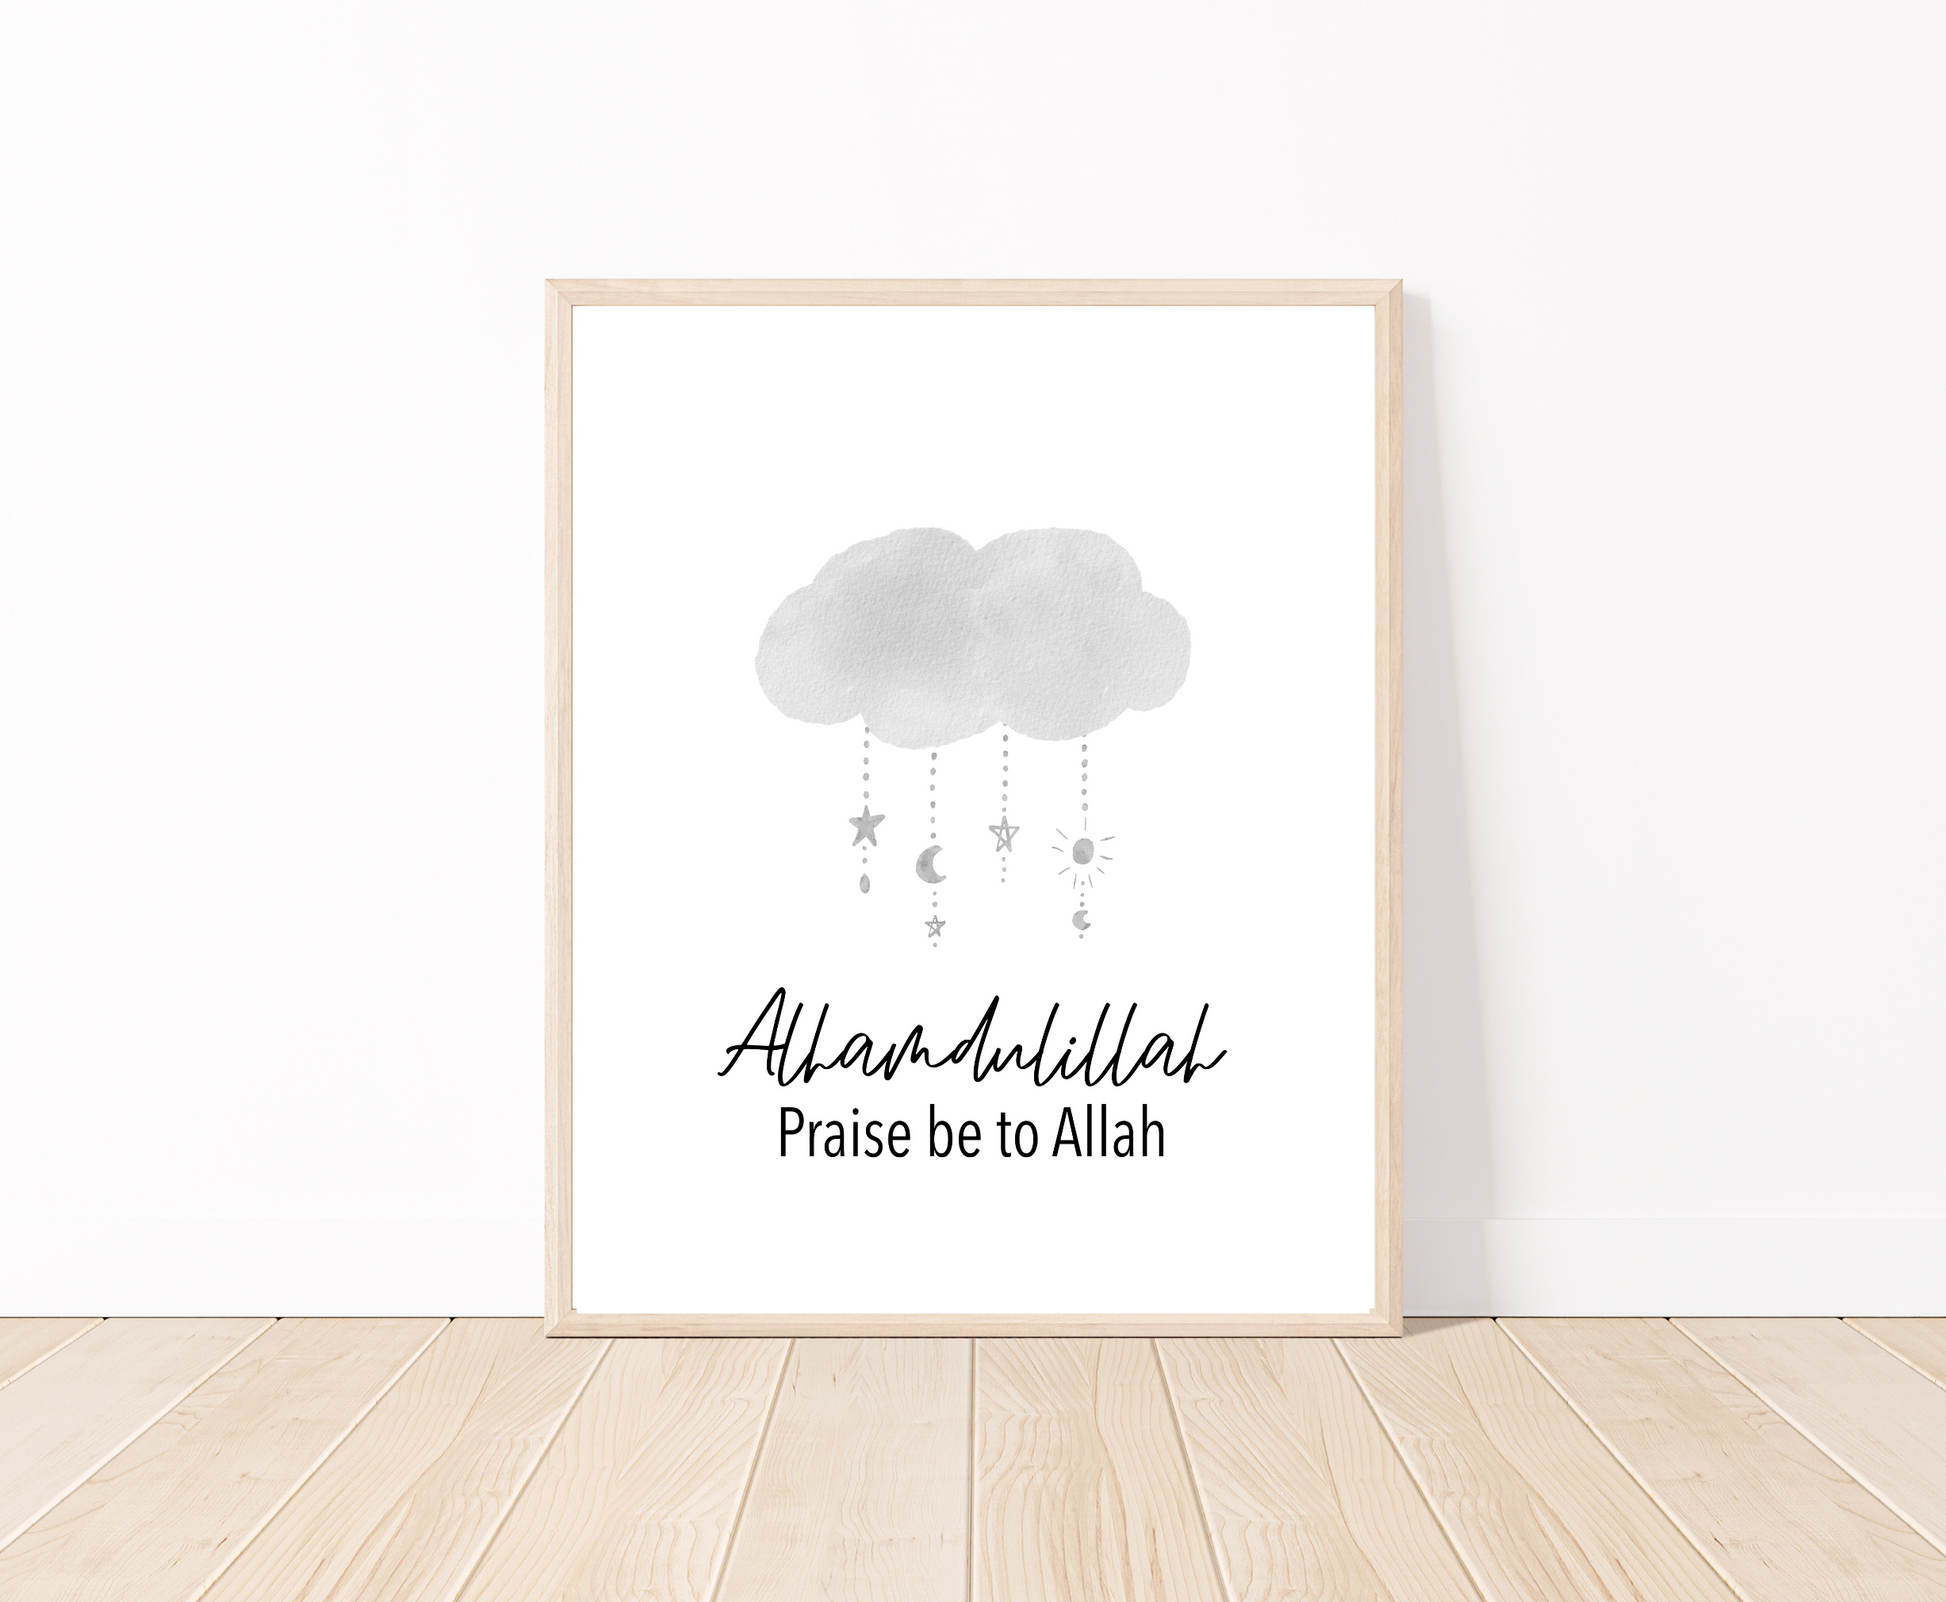 A little boy’s room digital poster that is placed on a white wall and parquet flooring shows a gray cloud design with the word “Alhamdulillah”, Praise Be to Allah below.